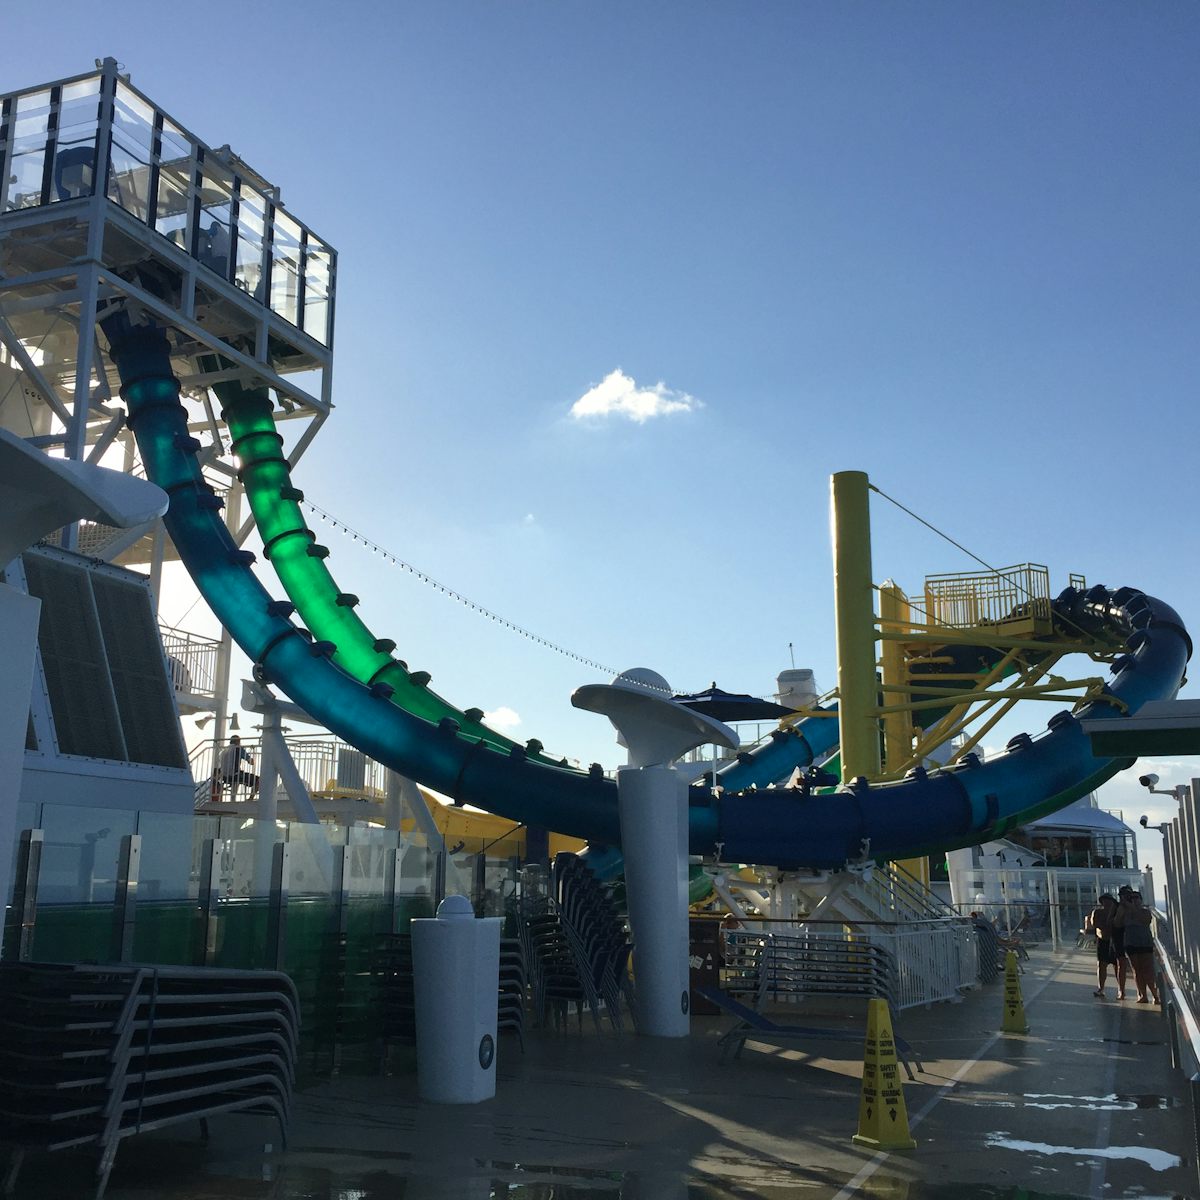 Duel racing water slides. Who can slide down faster?